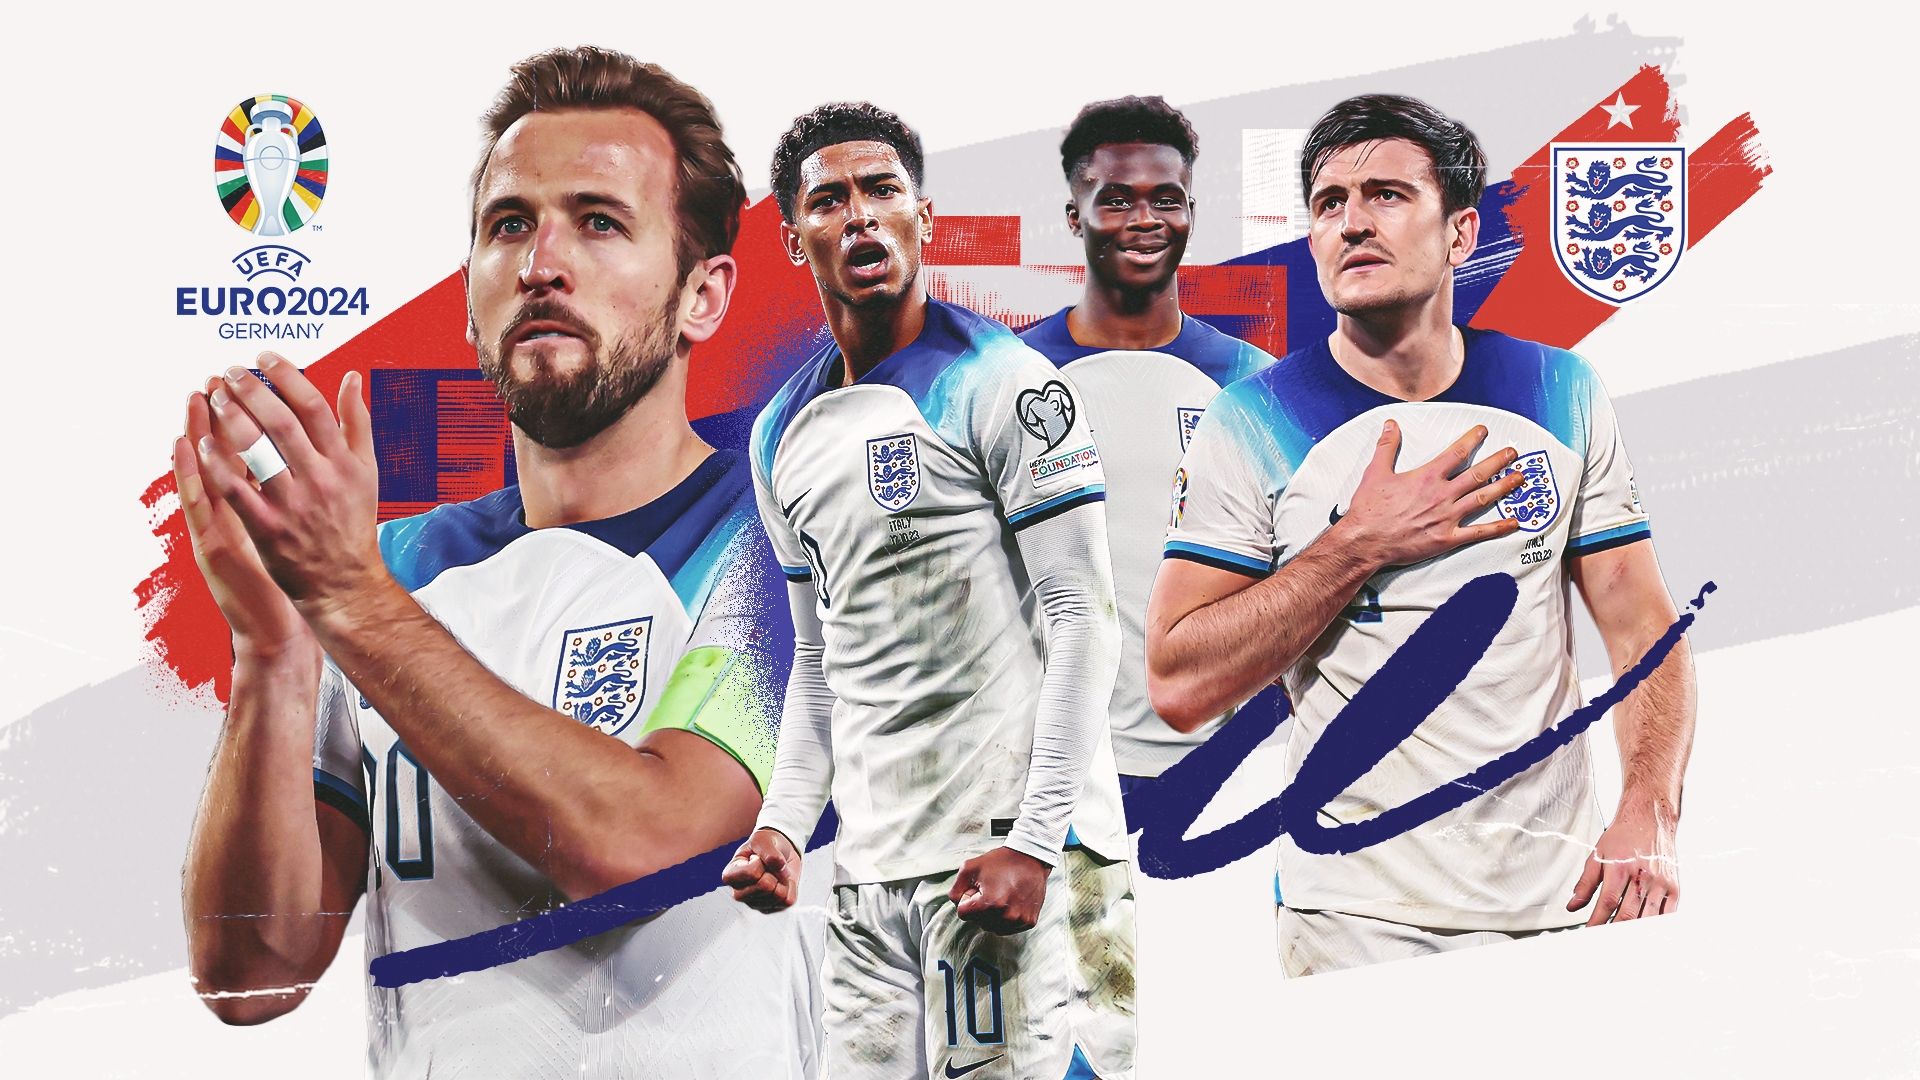 England National Team at Euro 2024 – Pursuing Glory in Germany